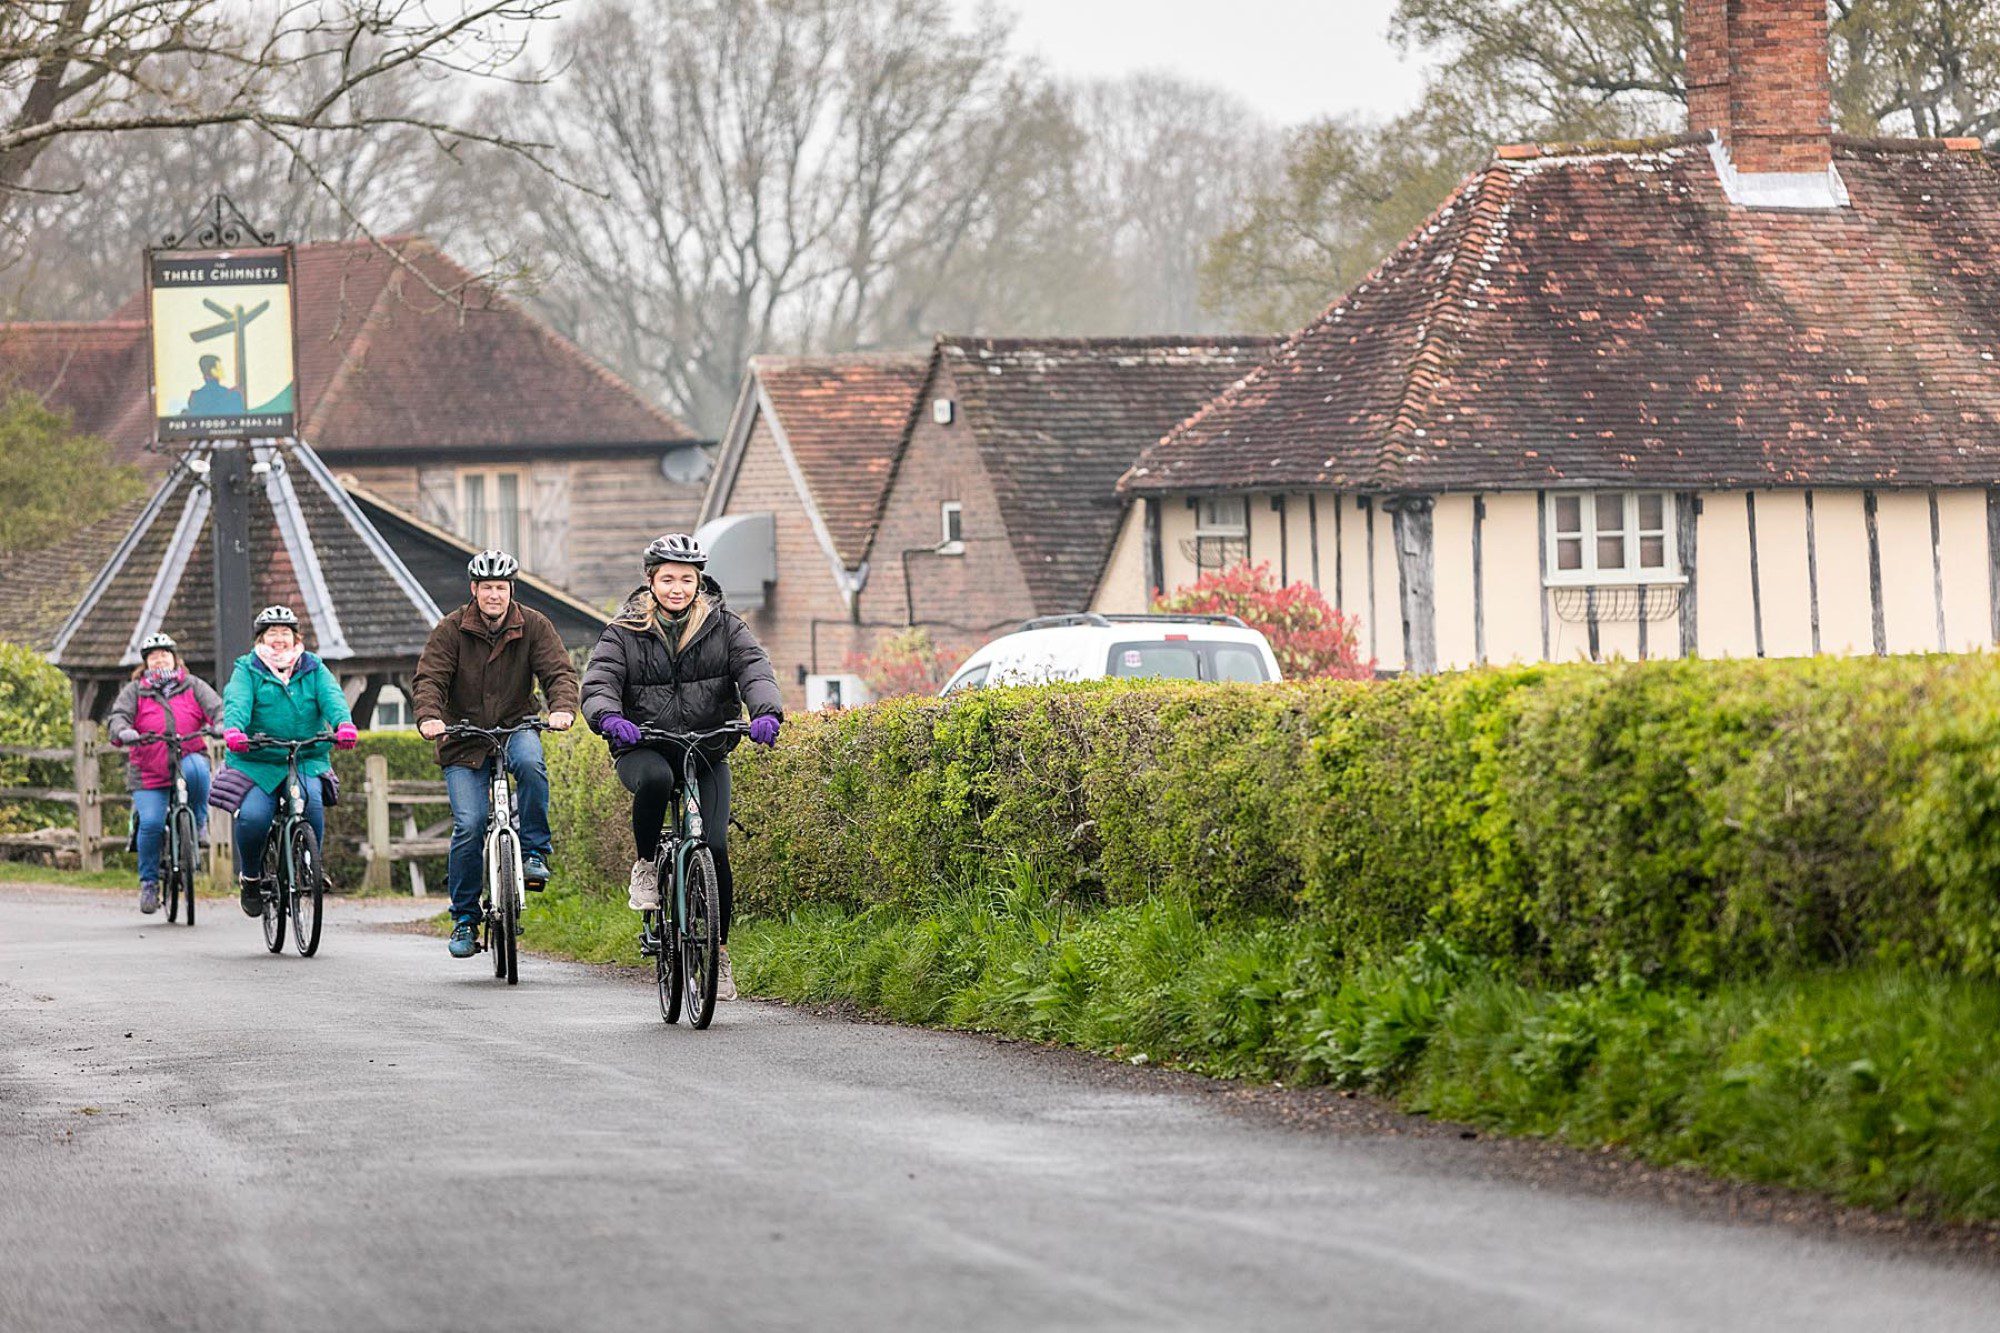 Four people cycling towards camera, on a road alongside the Three Chimneys pub.